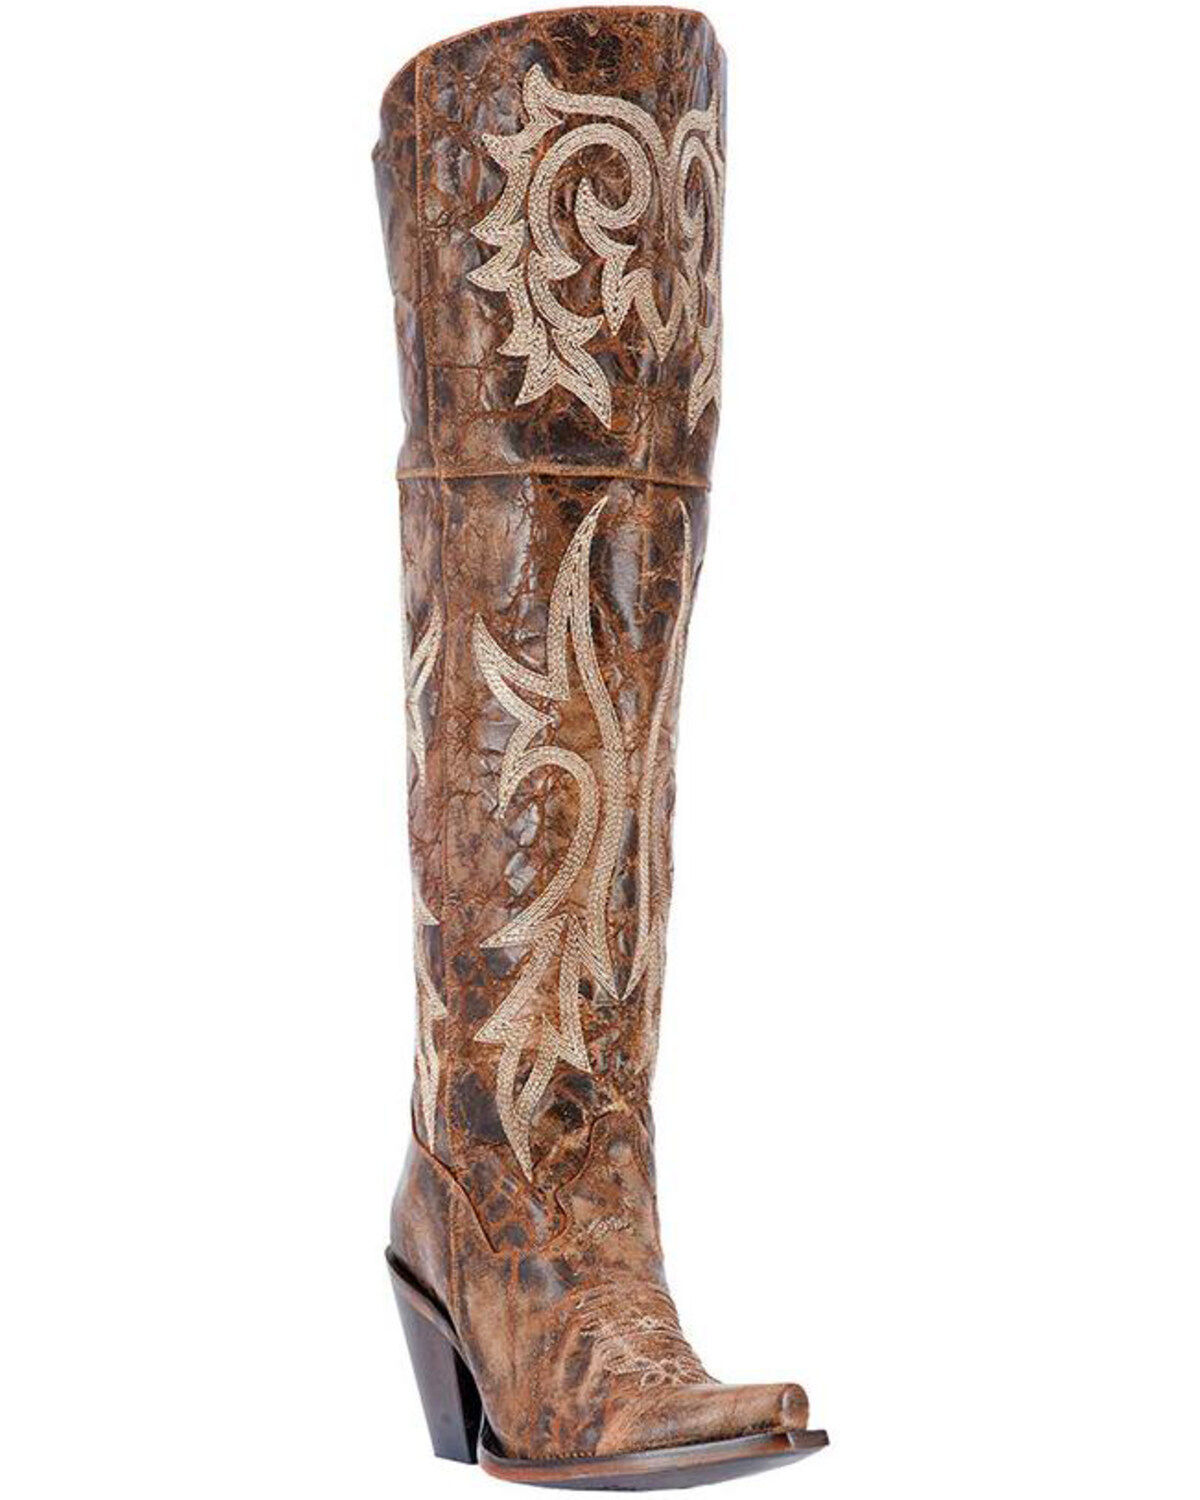 All Women's Boots \u0026 Shoes - Boot Barn